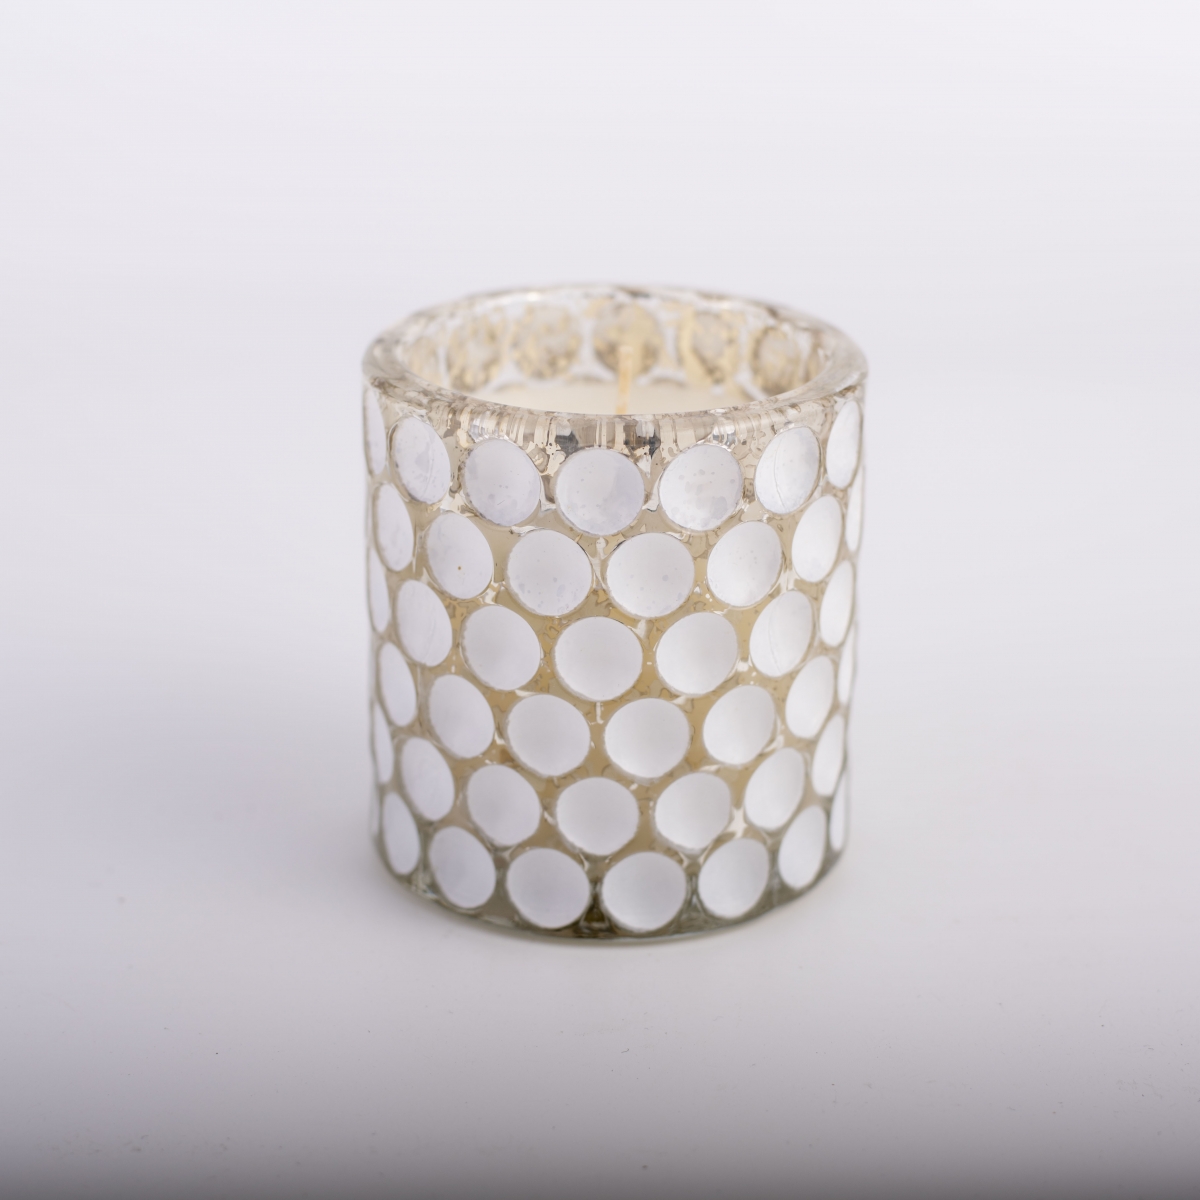 Scented Candles- Best Soy Candles ,Polishing White Honeycomb Embossed Glass Jar ,Christmas Candles ,China Factory ,Price-HOWCANDLE-Candles,Scented Candles,Aromatherapy Candles,Soy Candles,Vegan Candles,Jar Candles,Pillar Candles,Candle Gift Sets,Essential Oils,Reed Diffuser,Candle Holder,